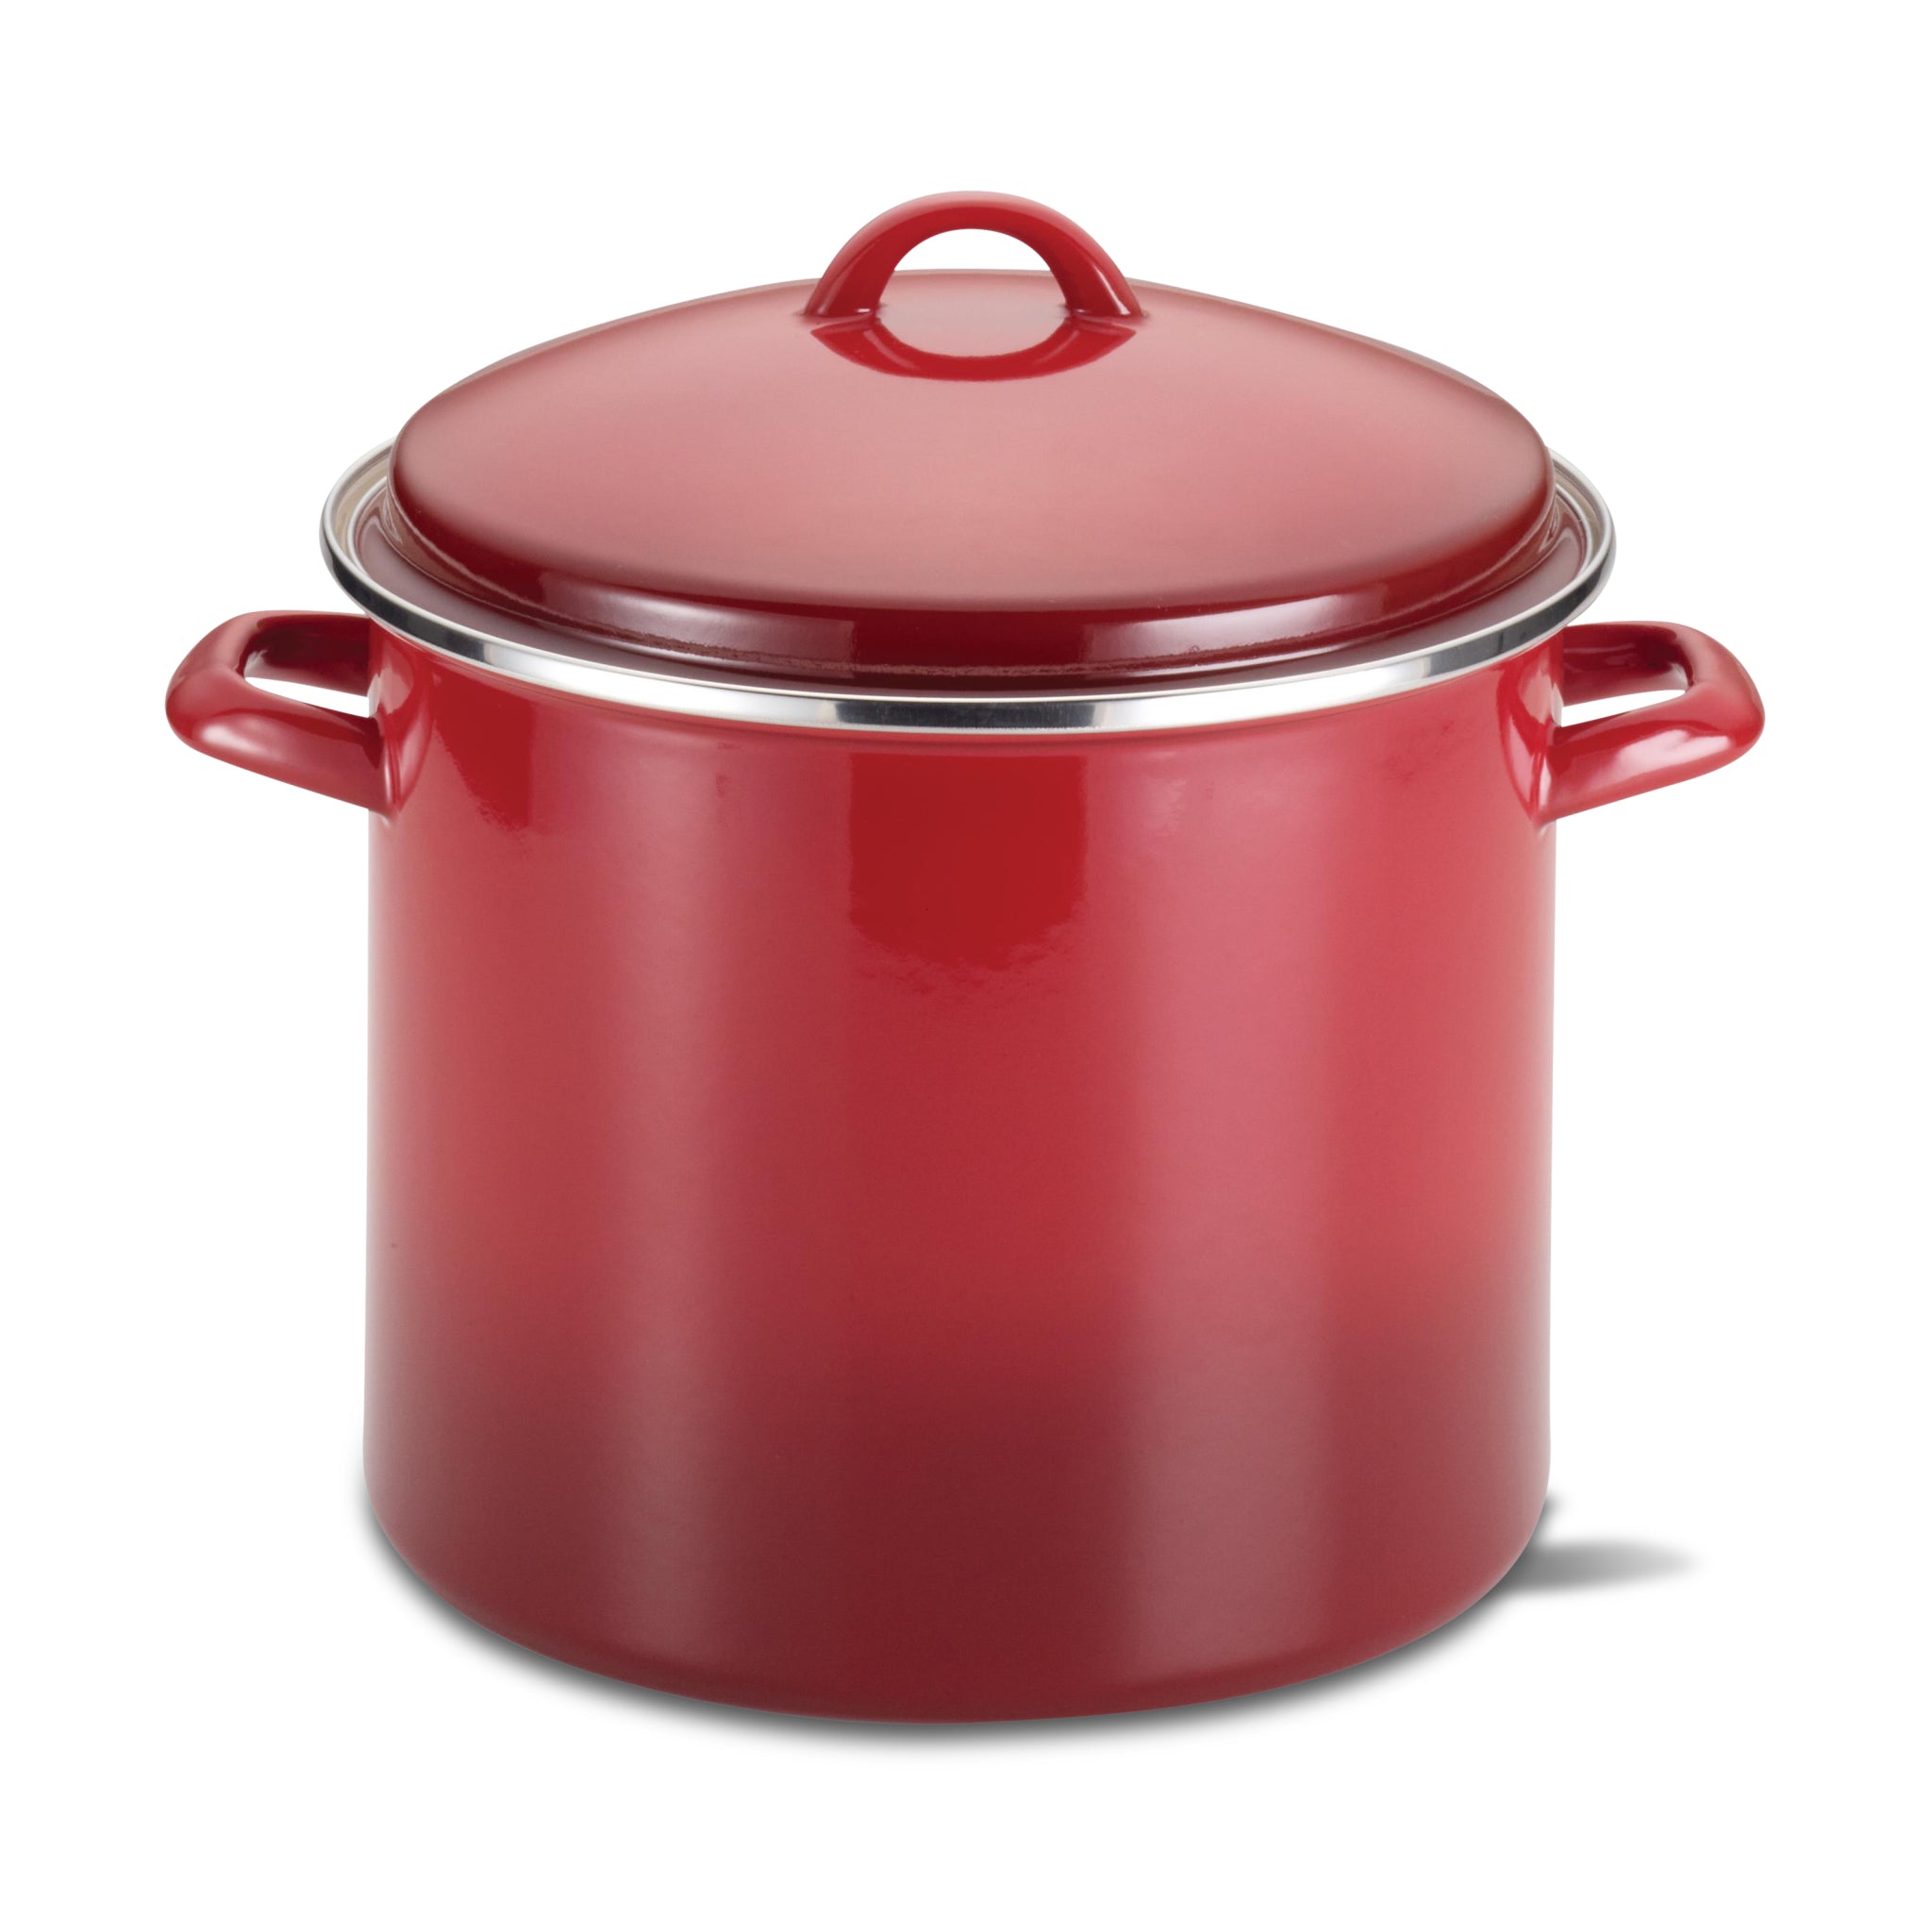 Cookware 12-Quart Covered Stockpot with Lid | Red Gradient